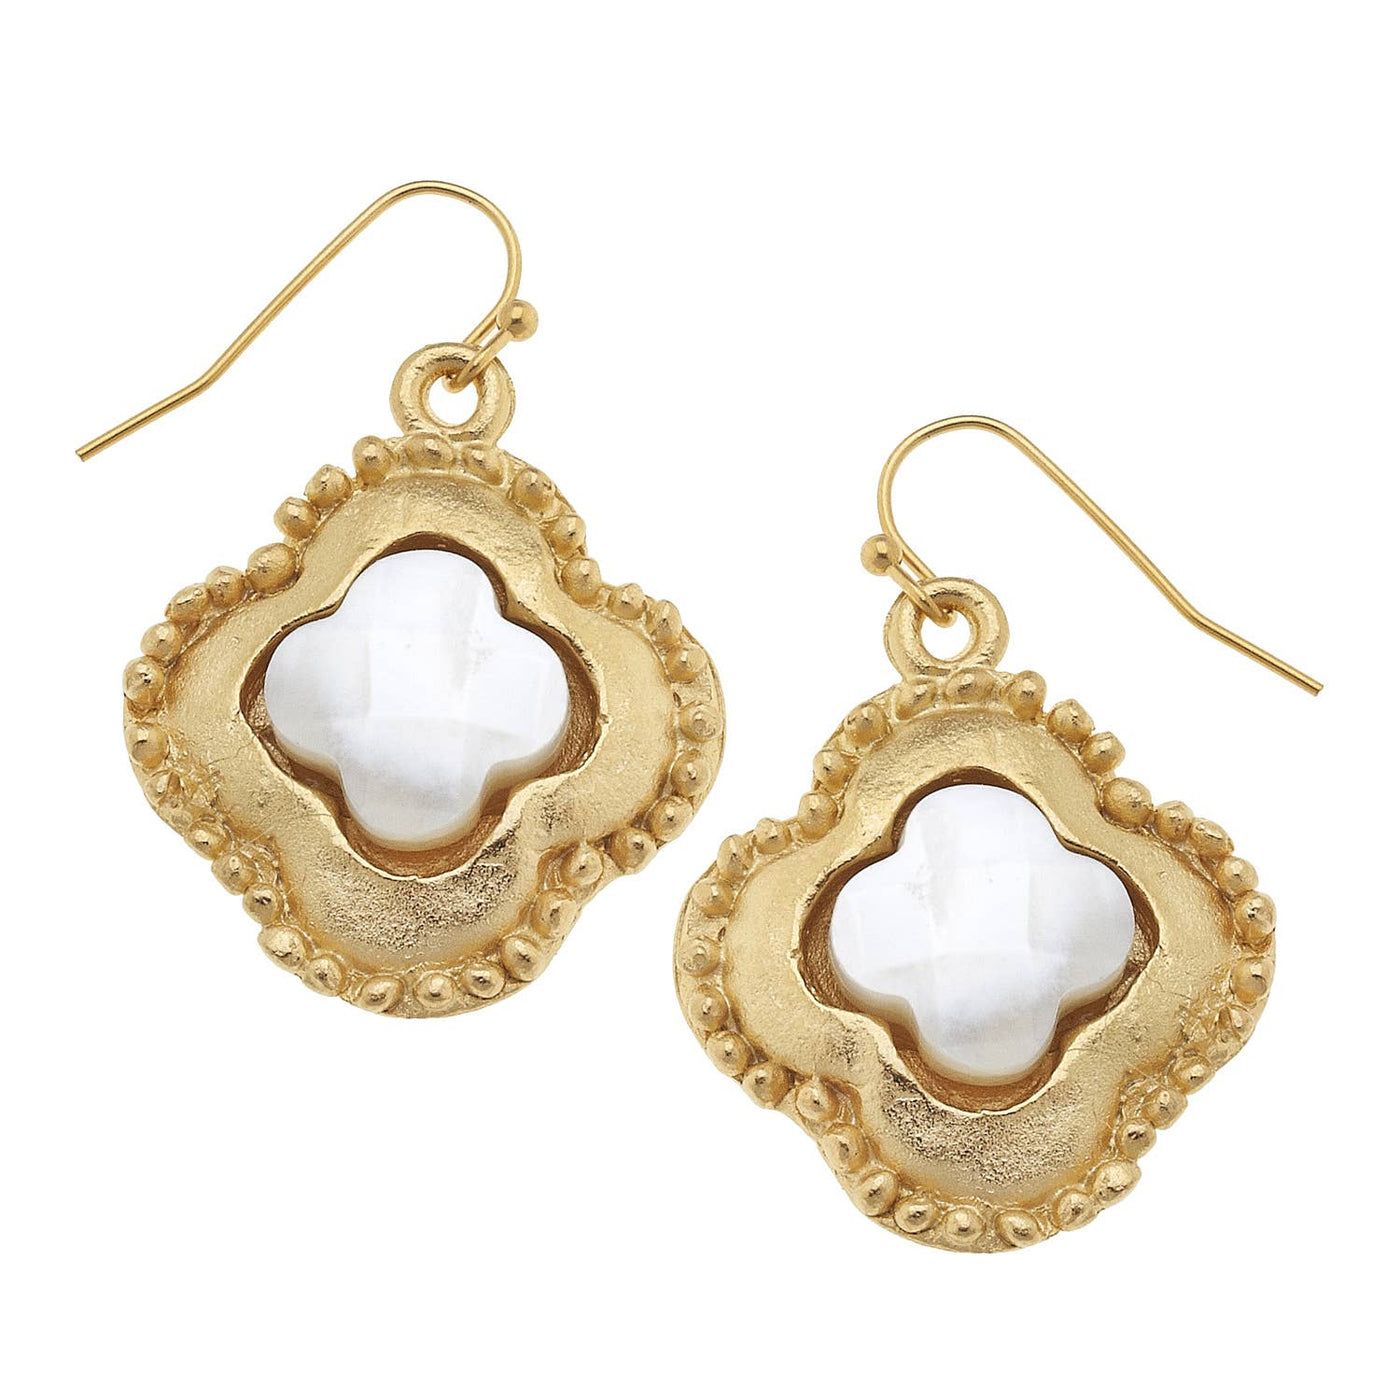 Gold Clover with Genuine Mother of Pearl Earrings